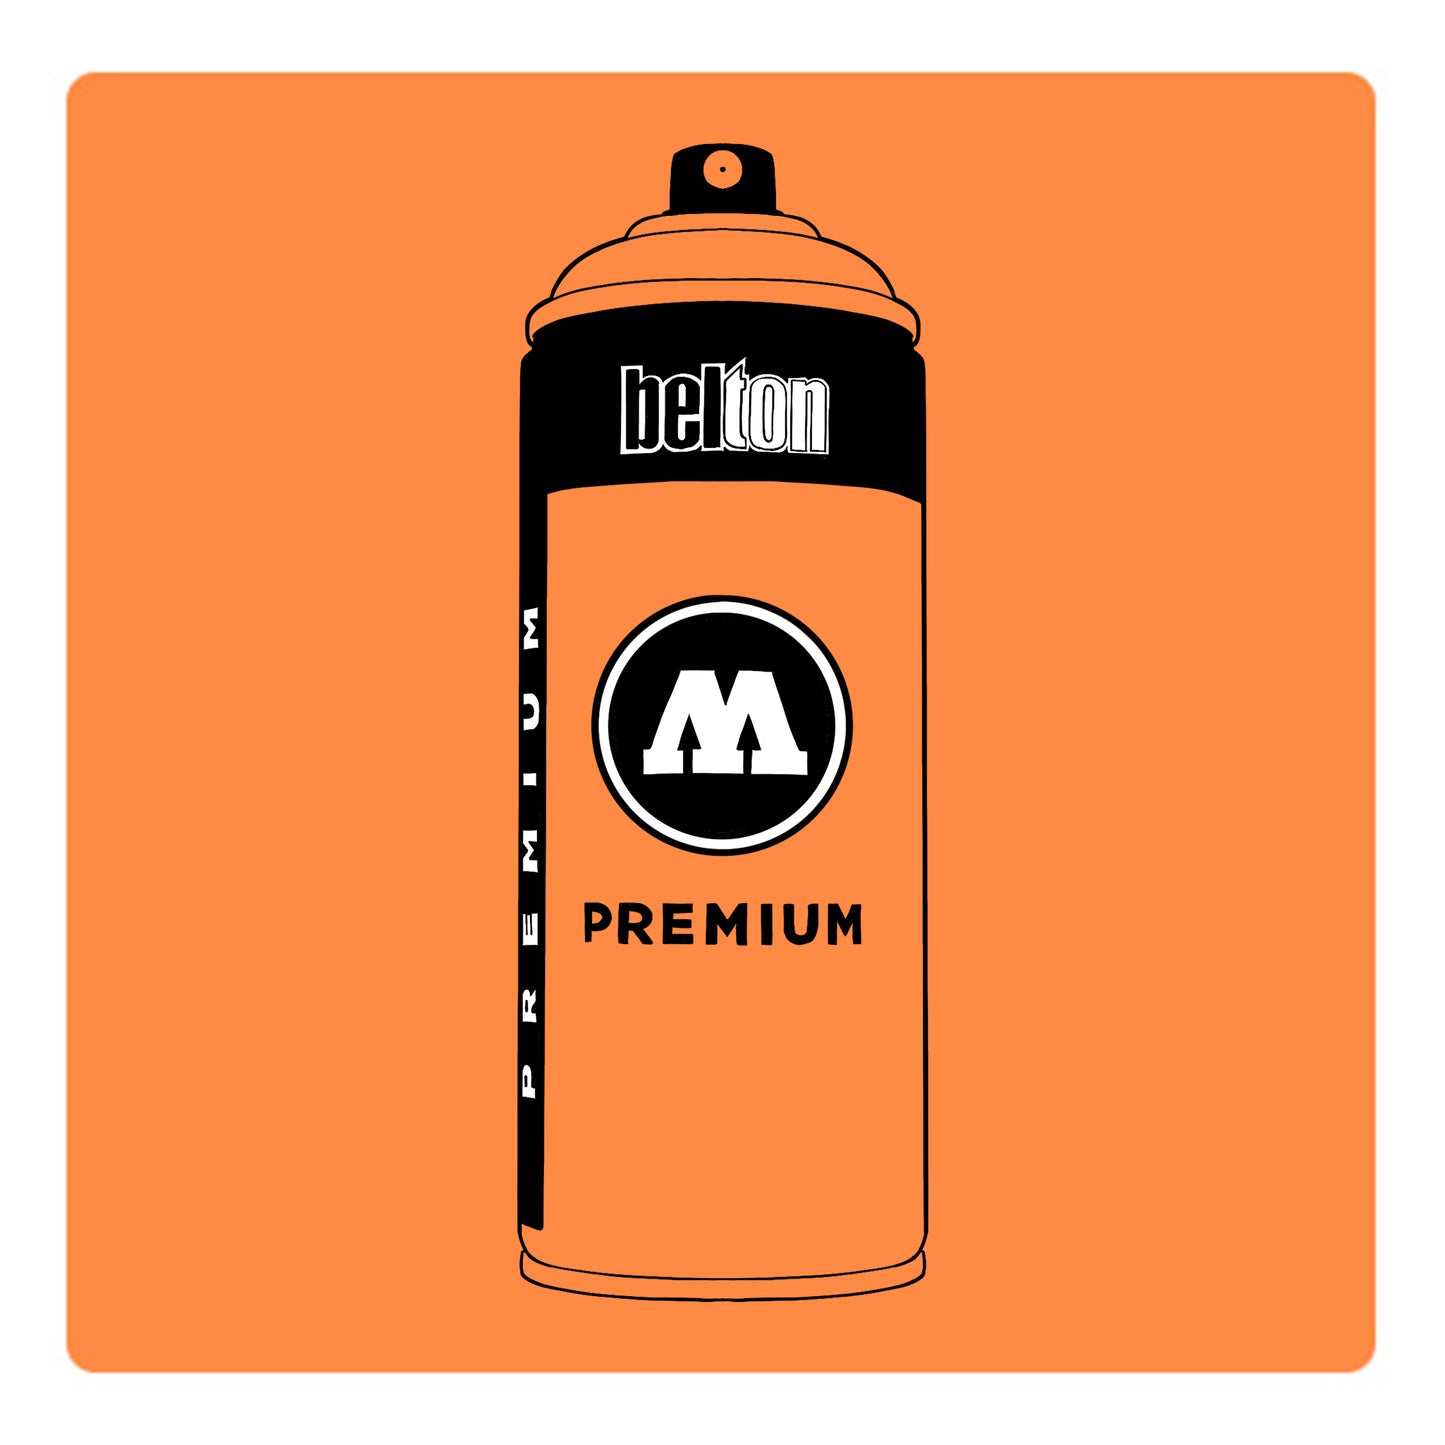 A black outline drawing of a pastel orange spray paint can with the words "belton","premium" and the letter"M" written on the face in black and white font. The background is a color swatch of the same pastel orange with a white border